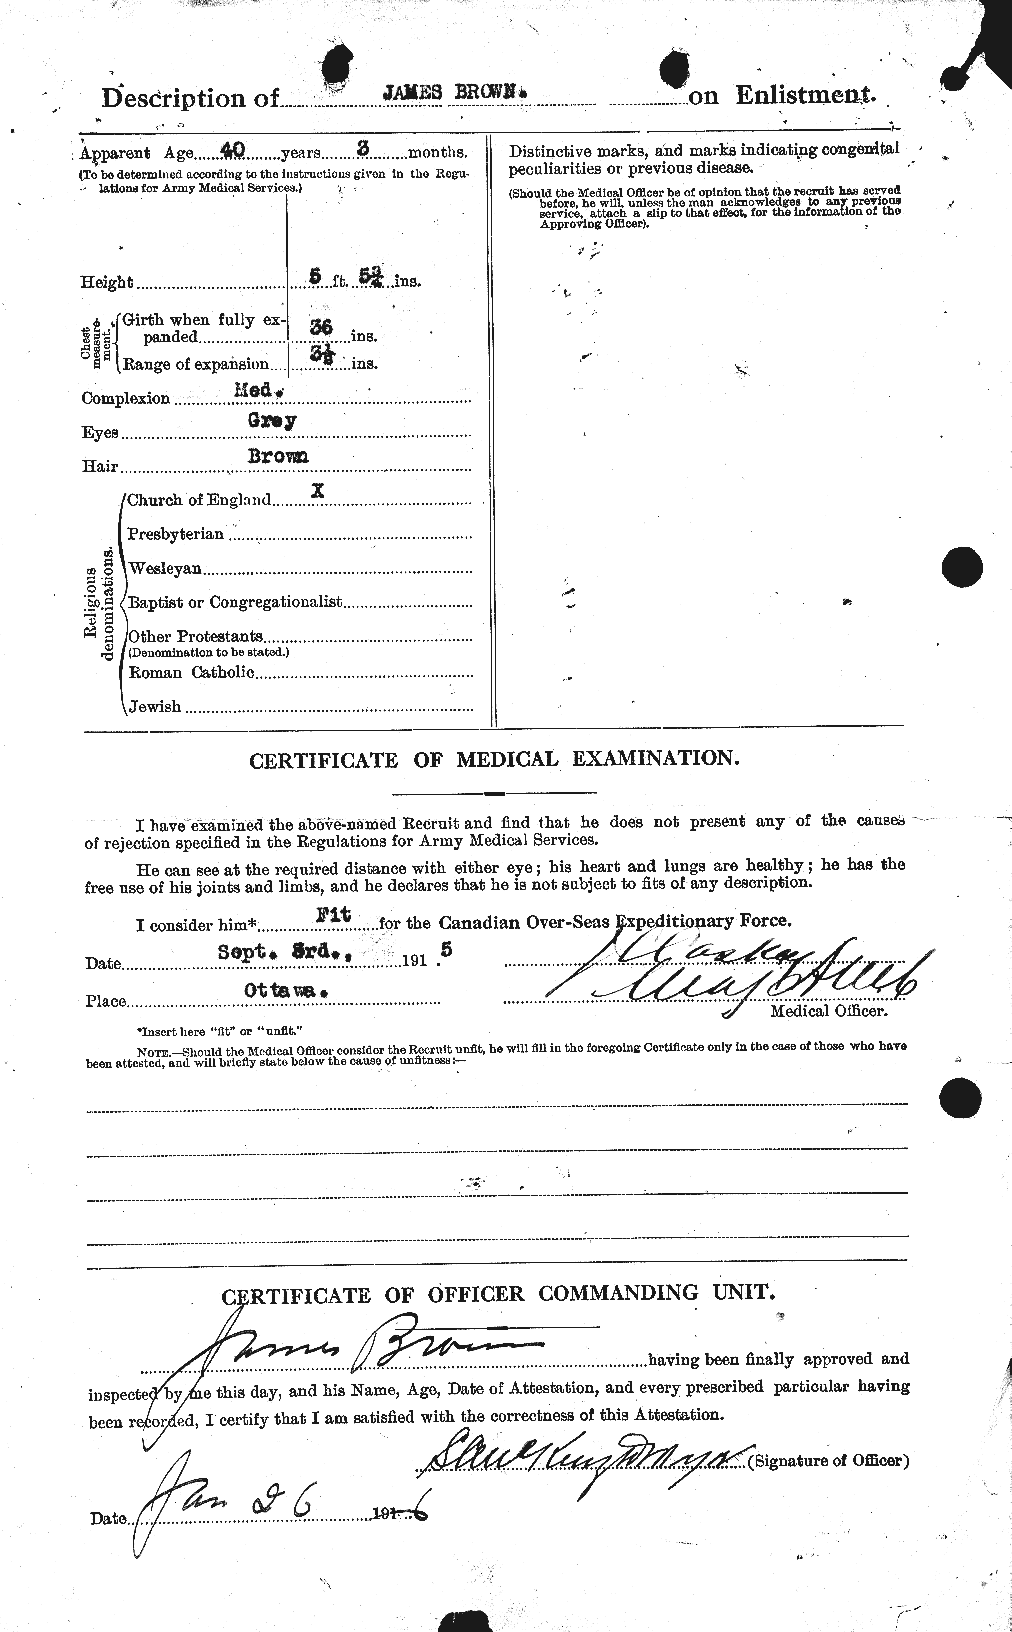 Personnel Records of the First World War - CEF 265709b